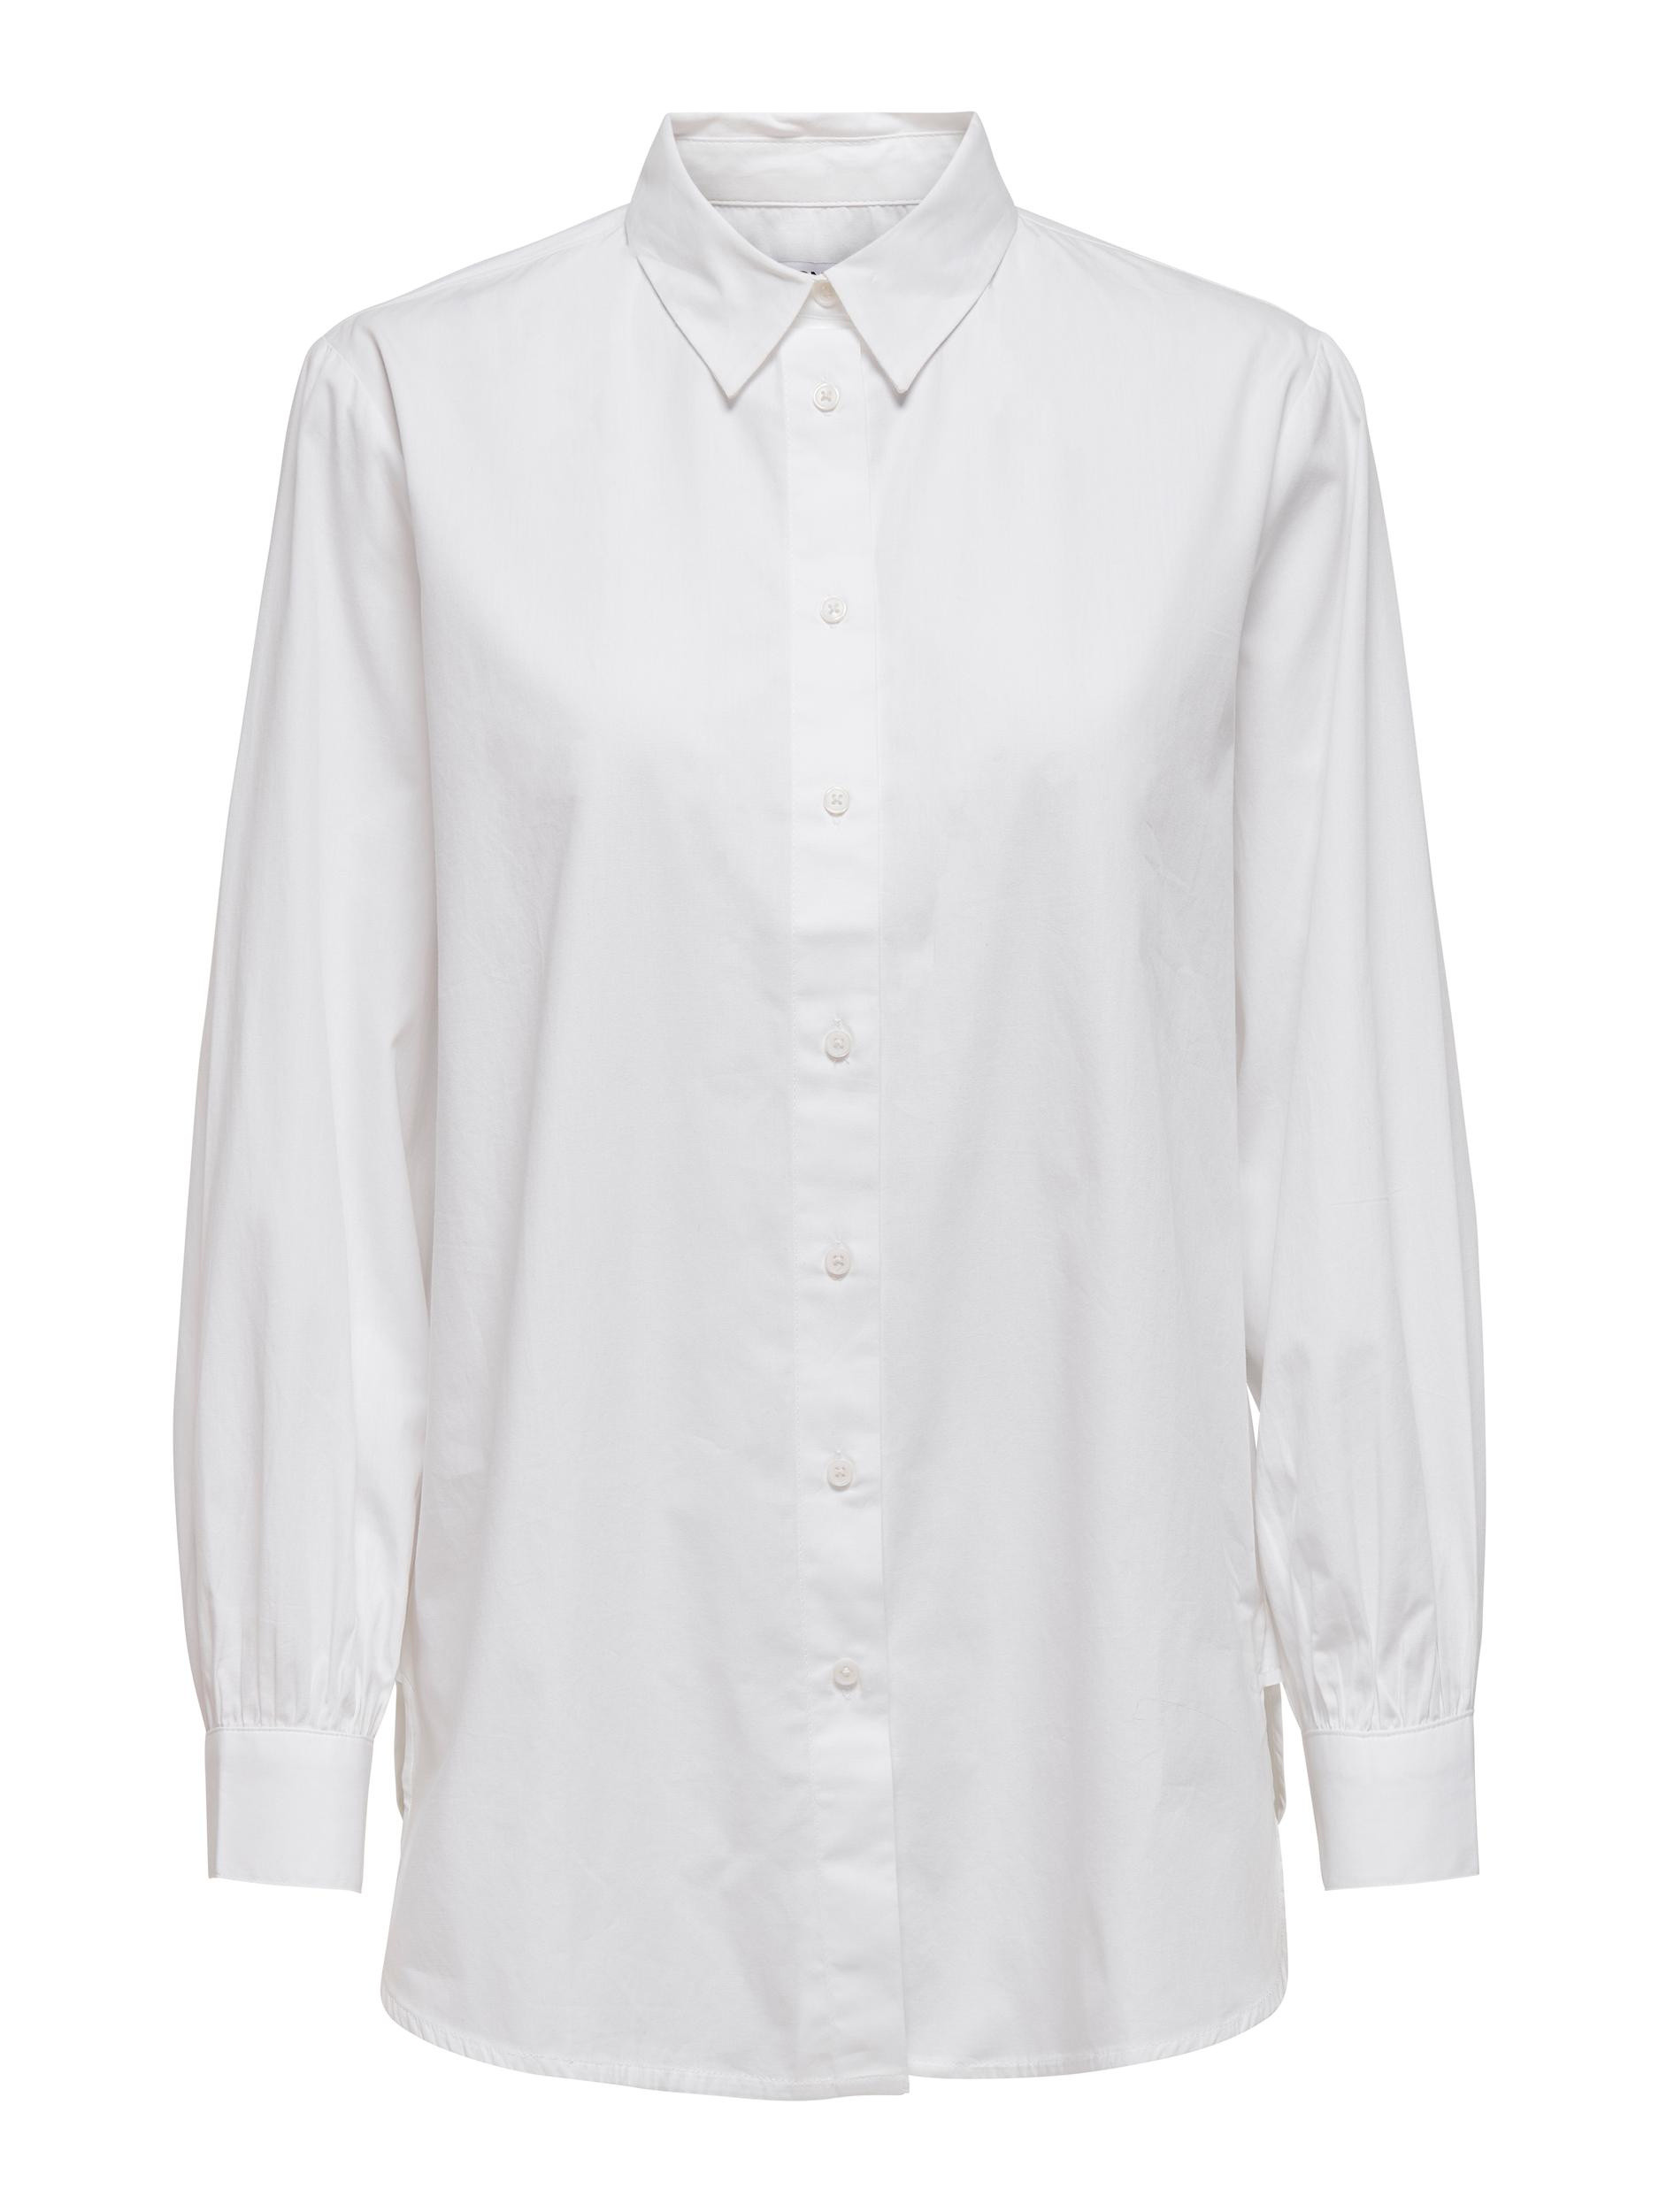 Camicia 100% cotone, Bianco, large image number 0